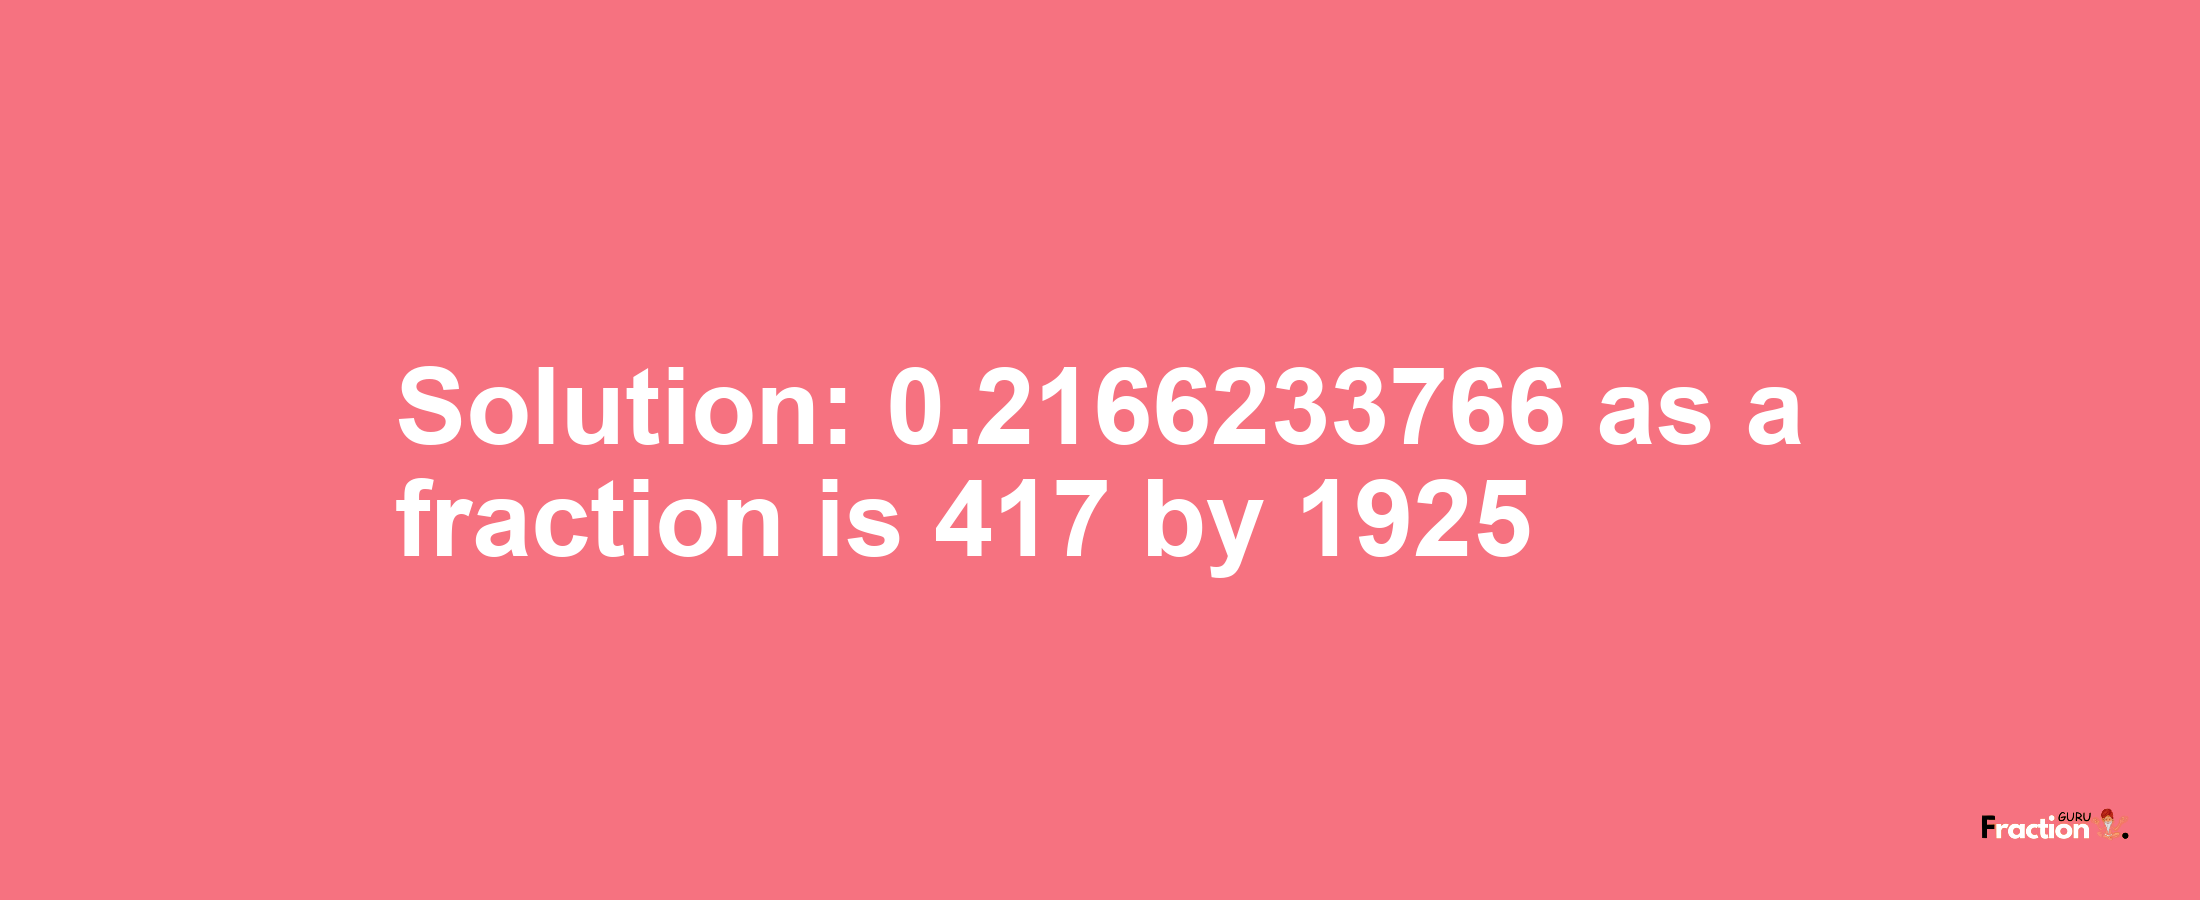 Solution:0.2166233766 as a fraction is 417/1925